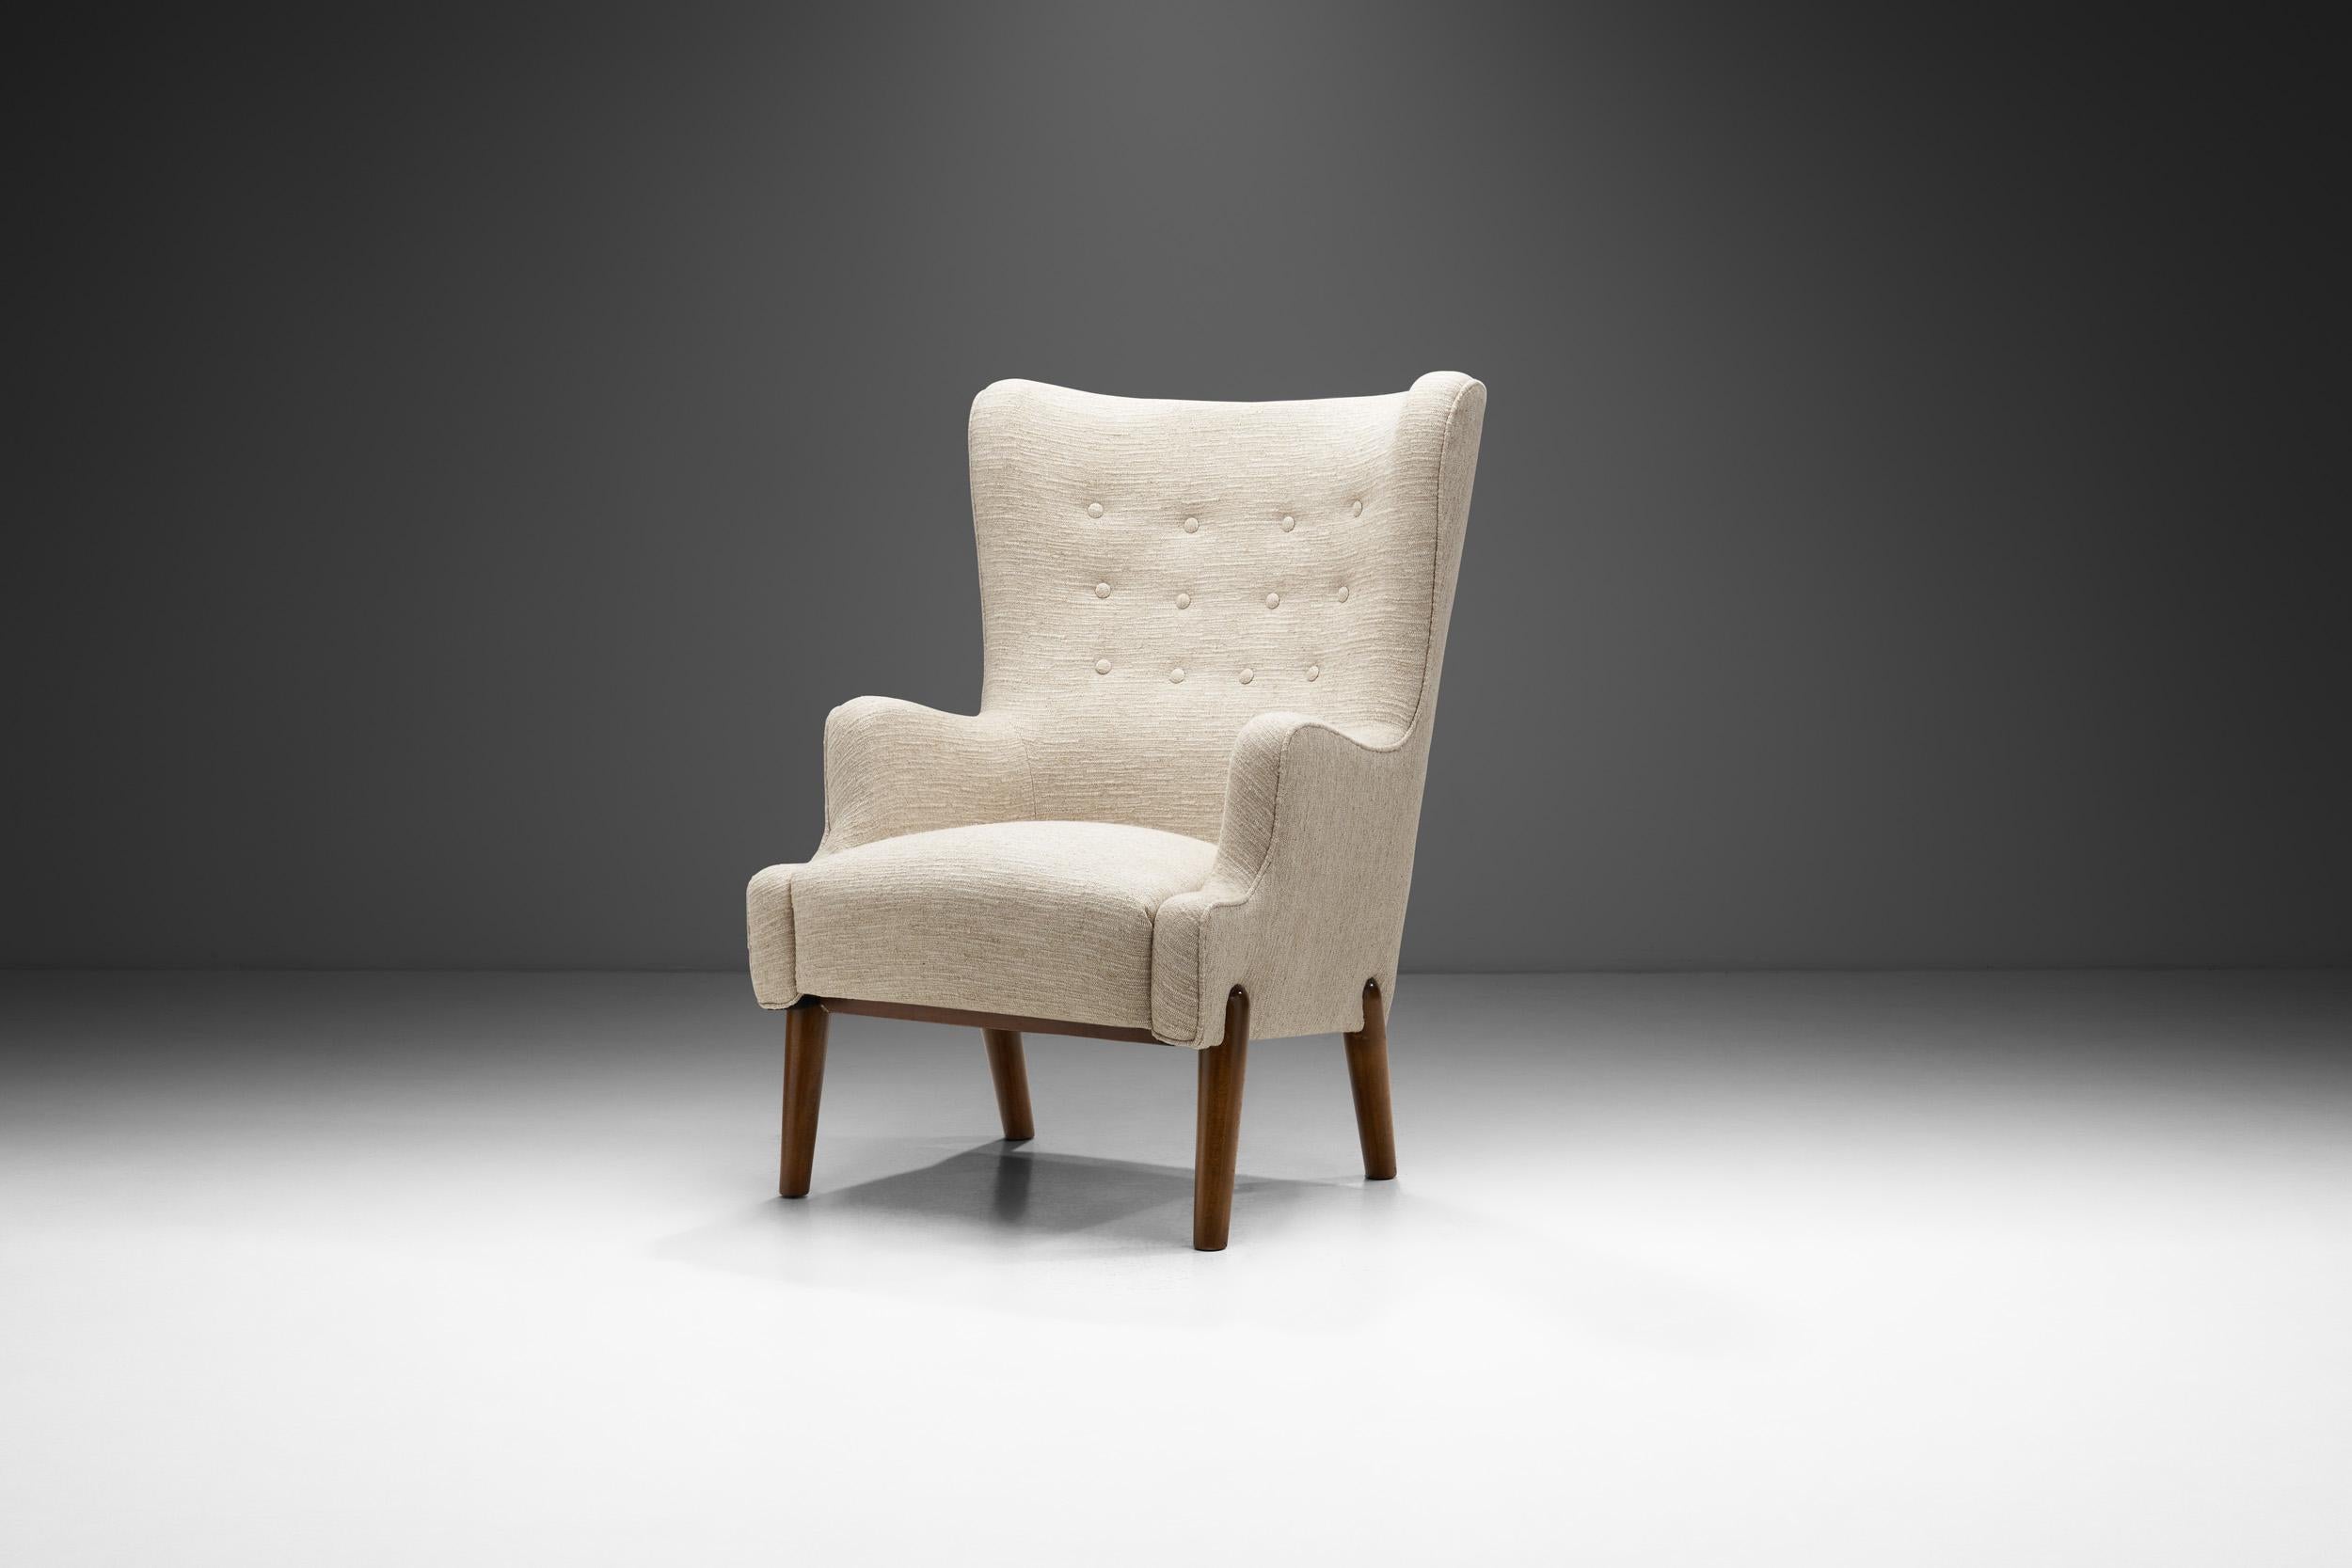 When Eva and Nils Koppel met, she was studying mathematics, and he was studying engineering. Together they studied architecture and worked in Alvar Aalto’s office. Their furniture pieces - such as this lovely wingback chair - with their organic